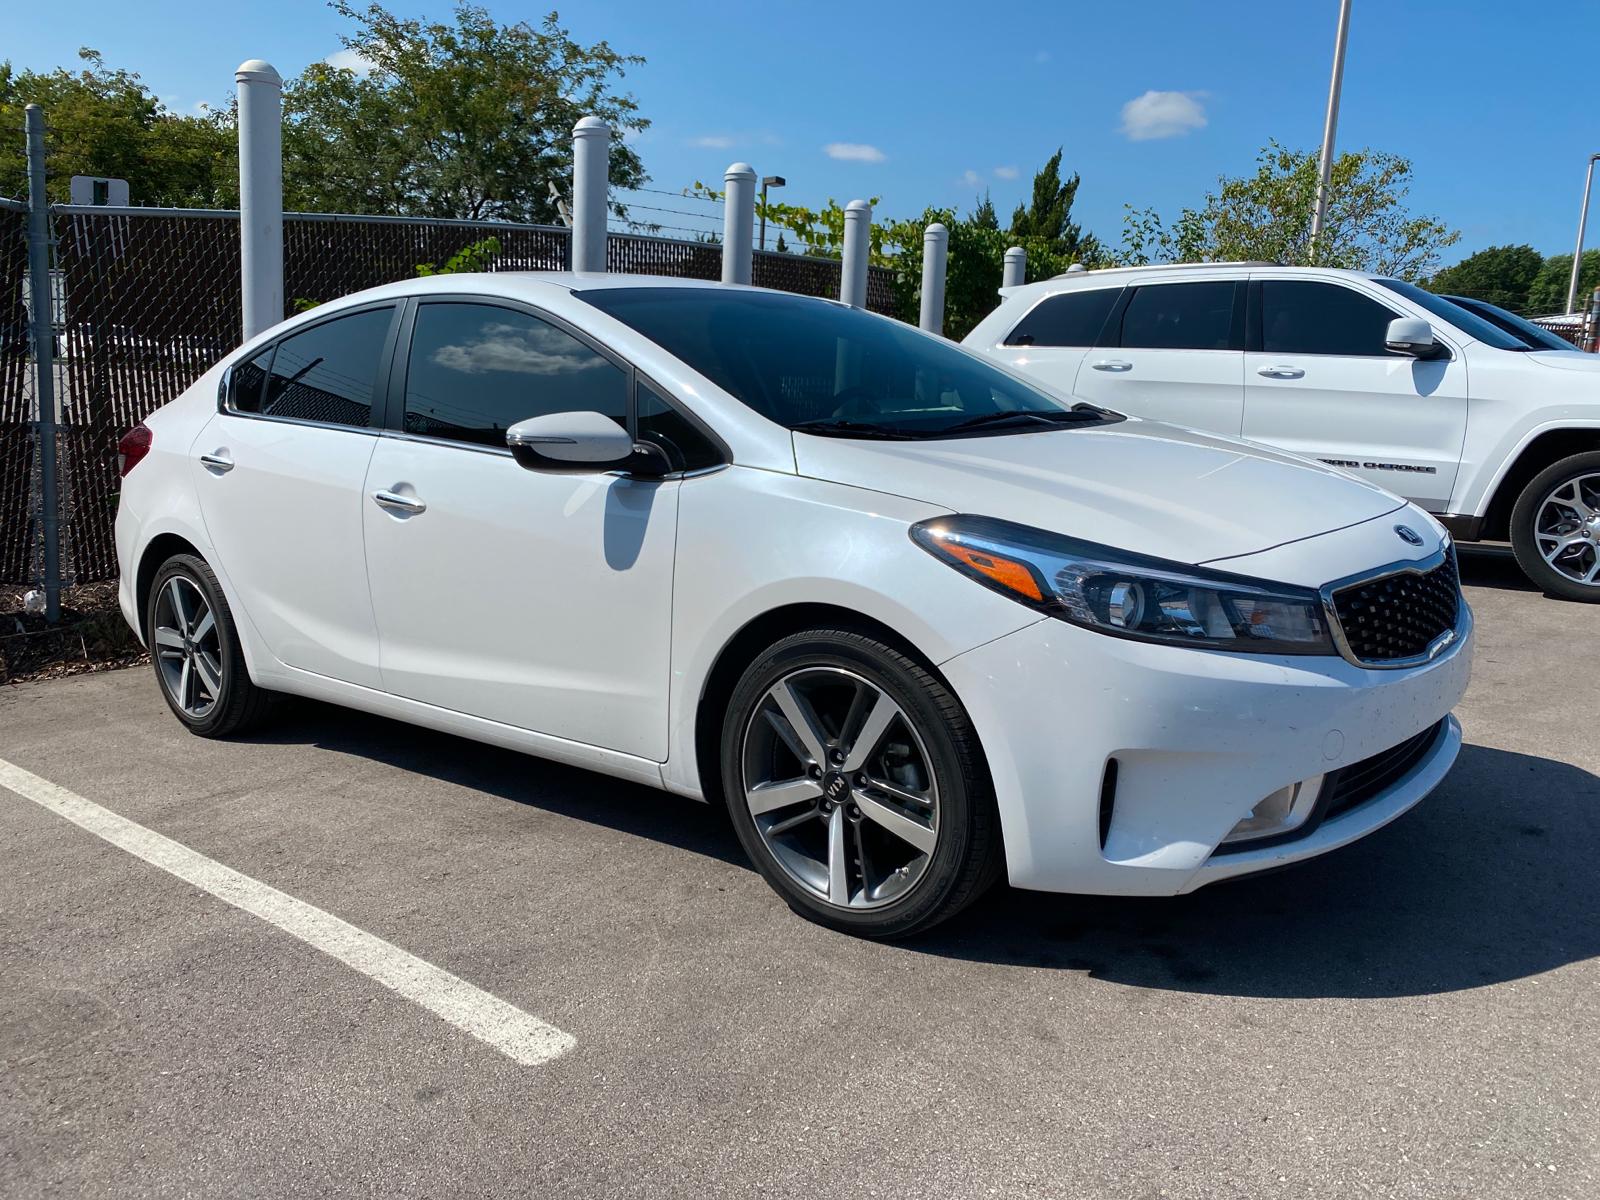 Pre-Owned 2018 Kia Forte EX Auto 4dr Car in Merriam #J210105A | Reed ...